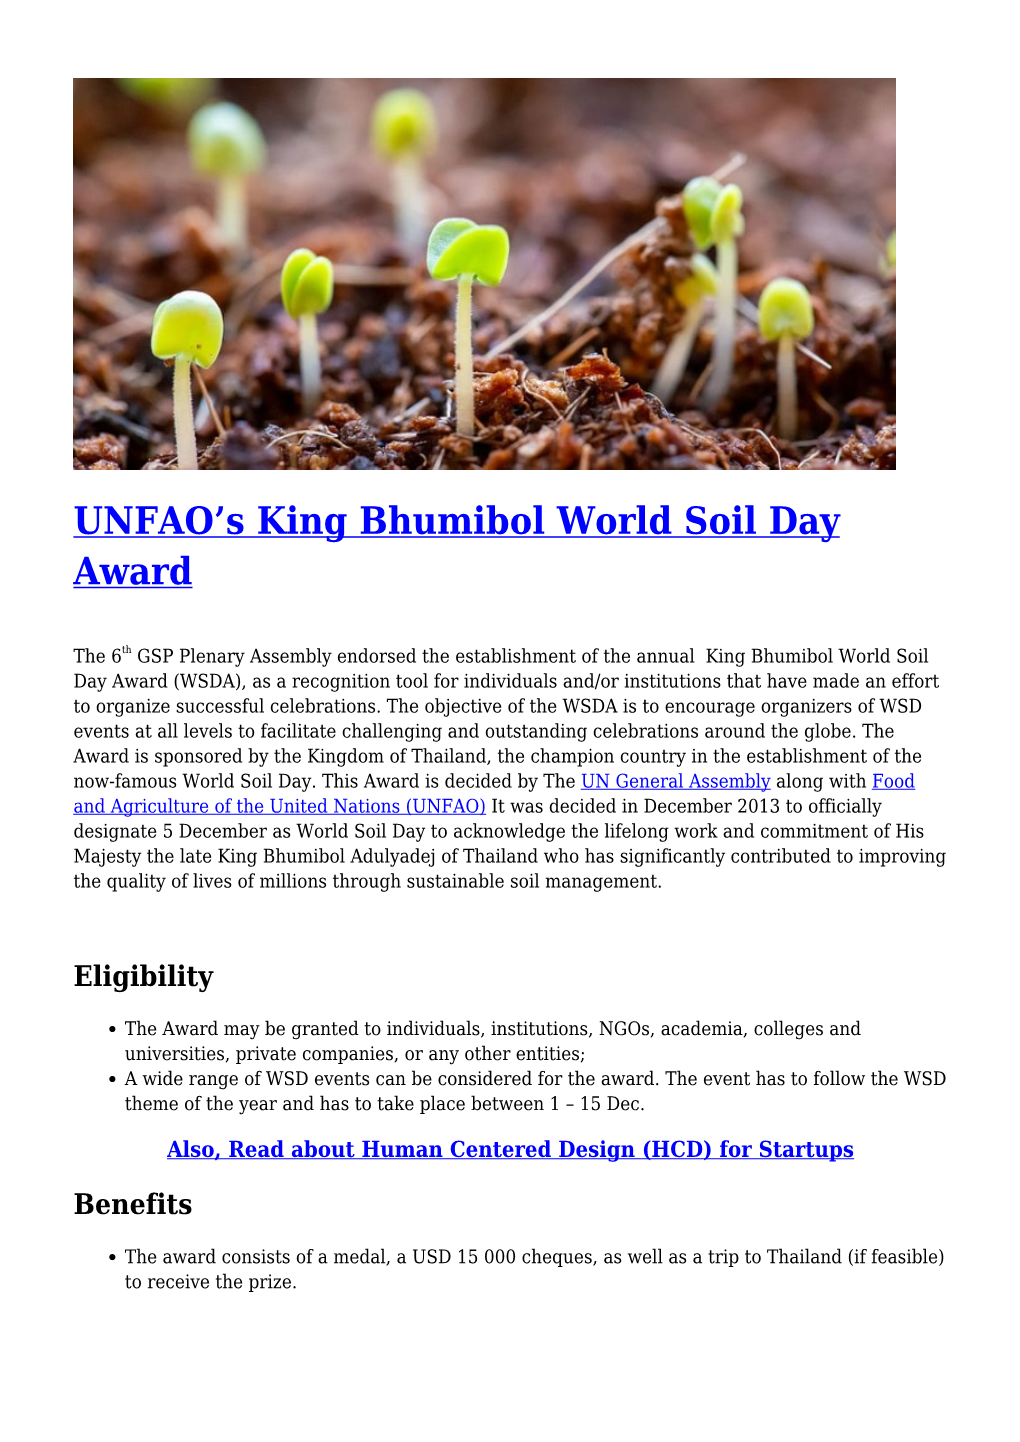 United Nations Environment Program: Seed Funding Challenge